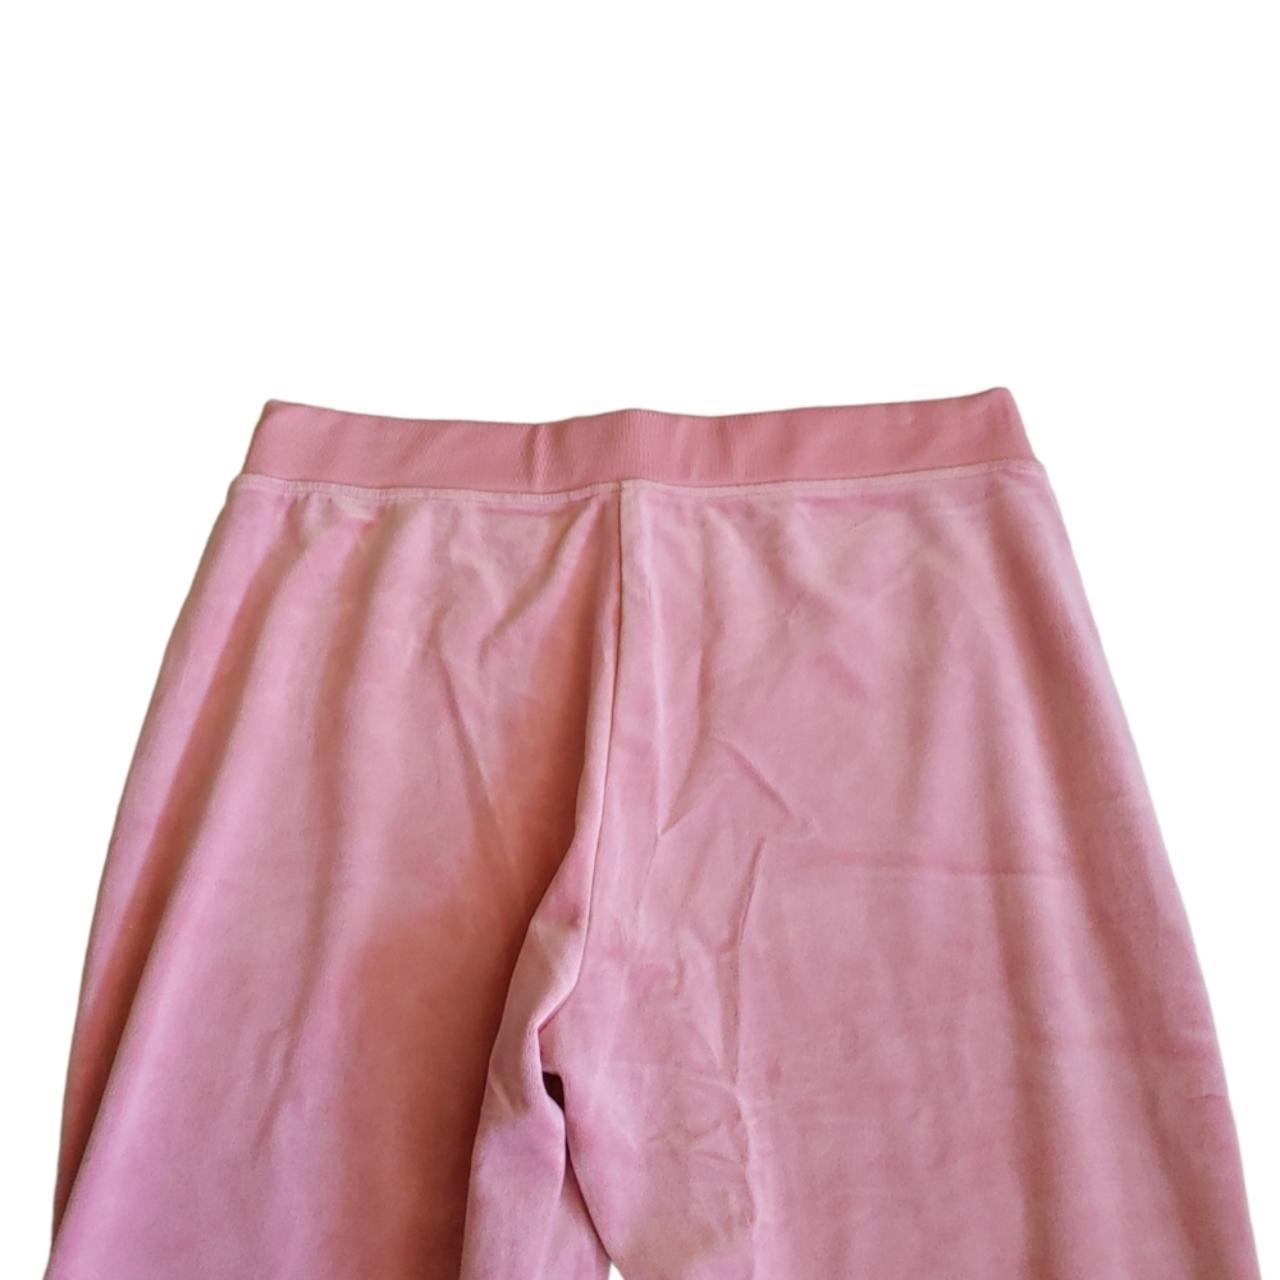 Product Image 4 - New Juicy Couture Pink Embroidered